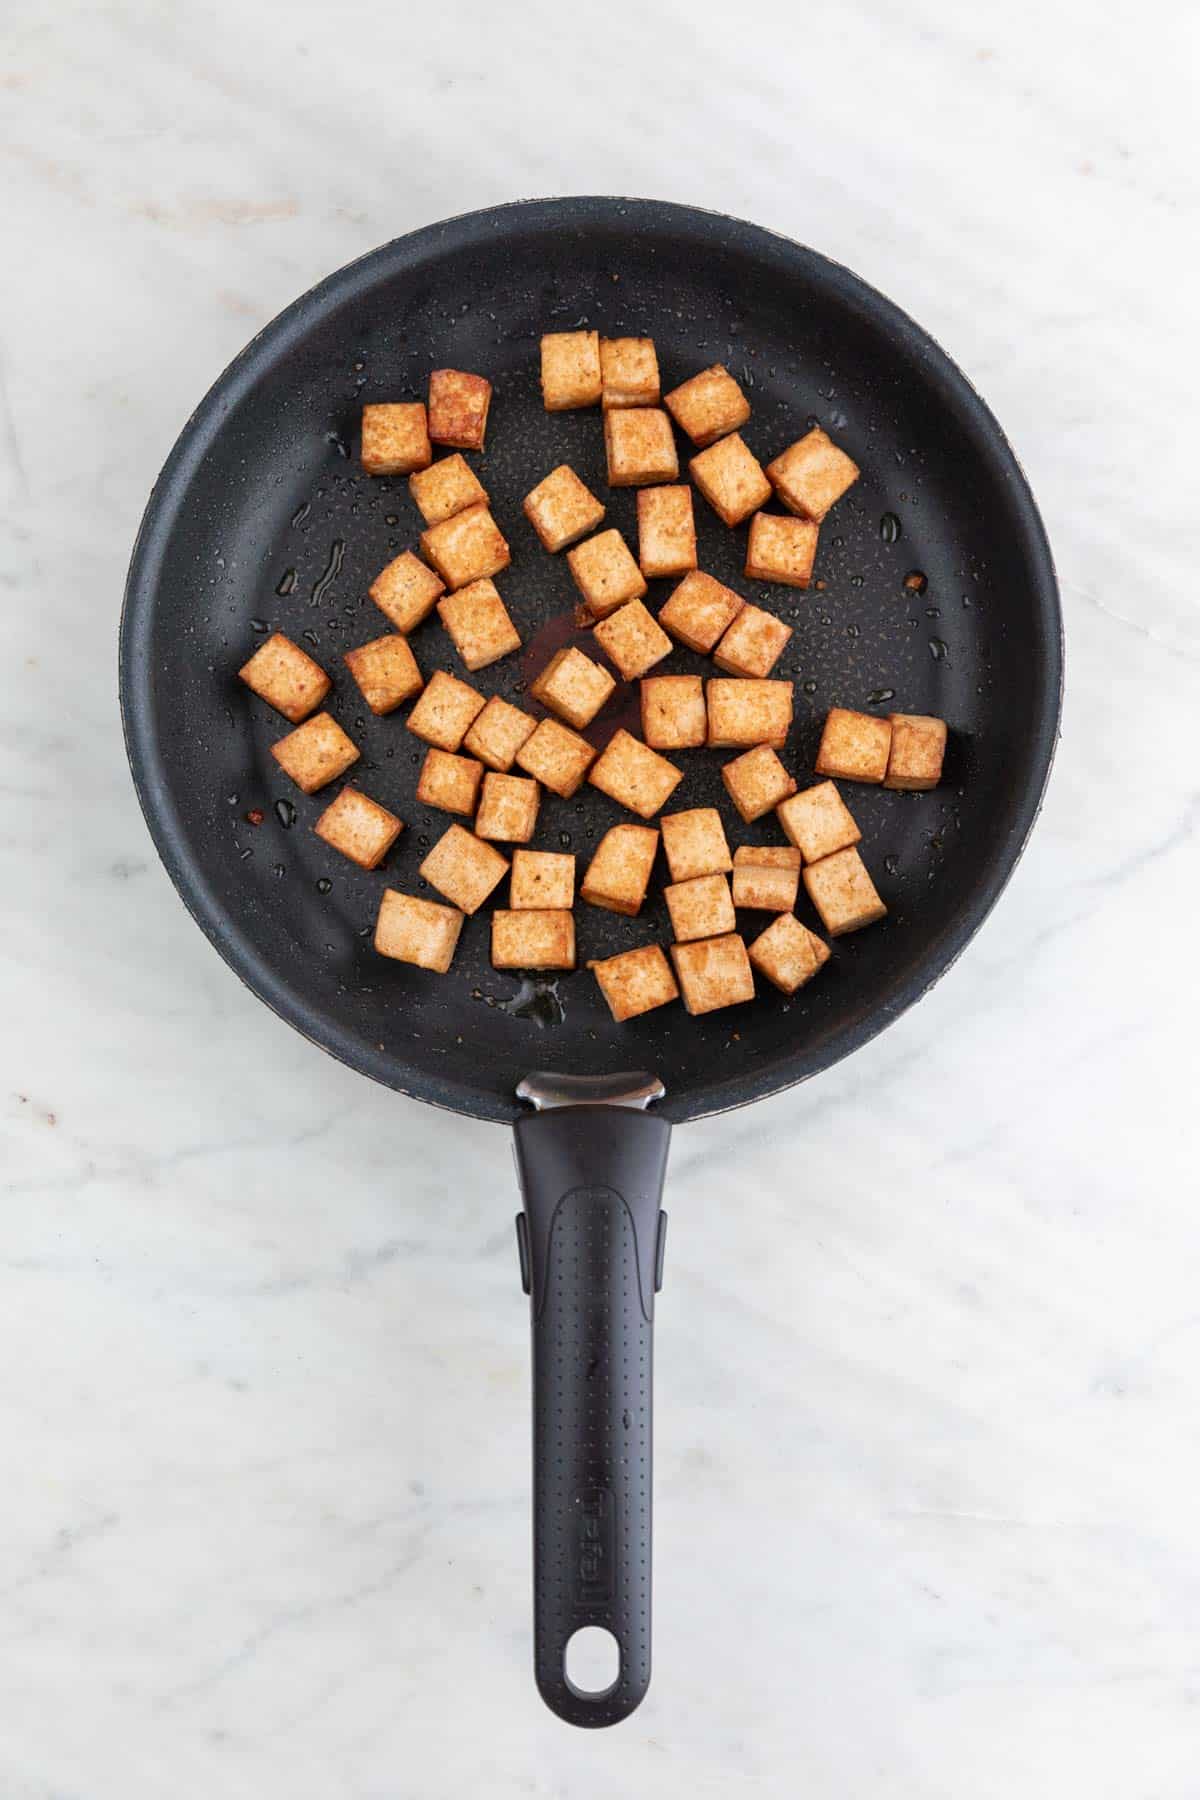 Marinated tofu cubes cooked in a non-stick pan.